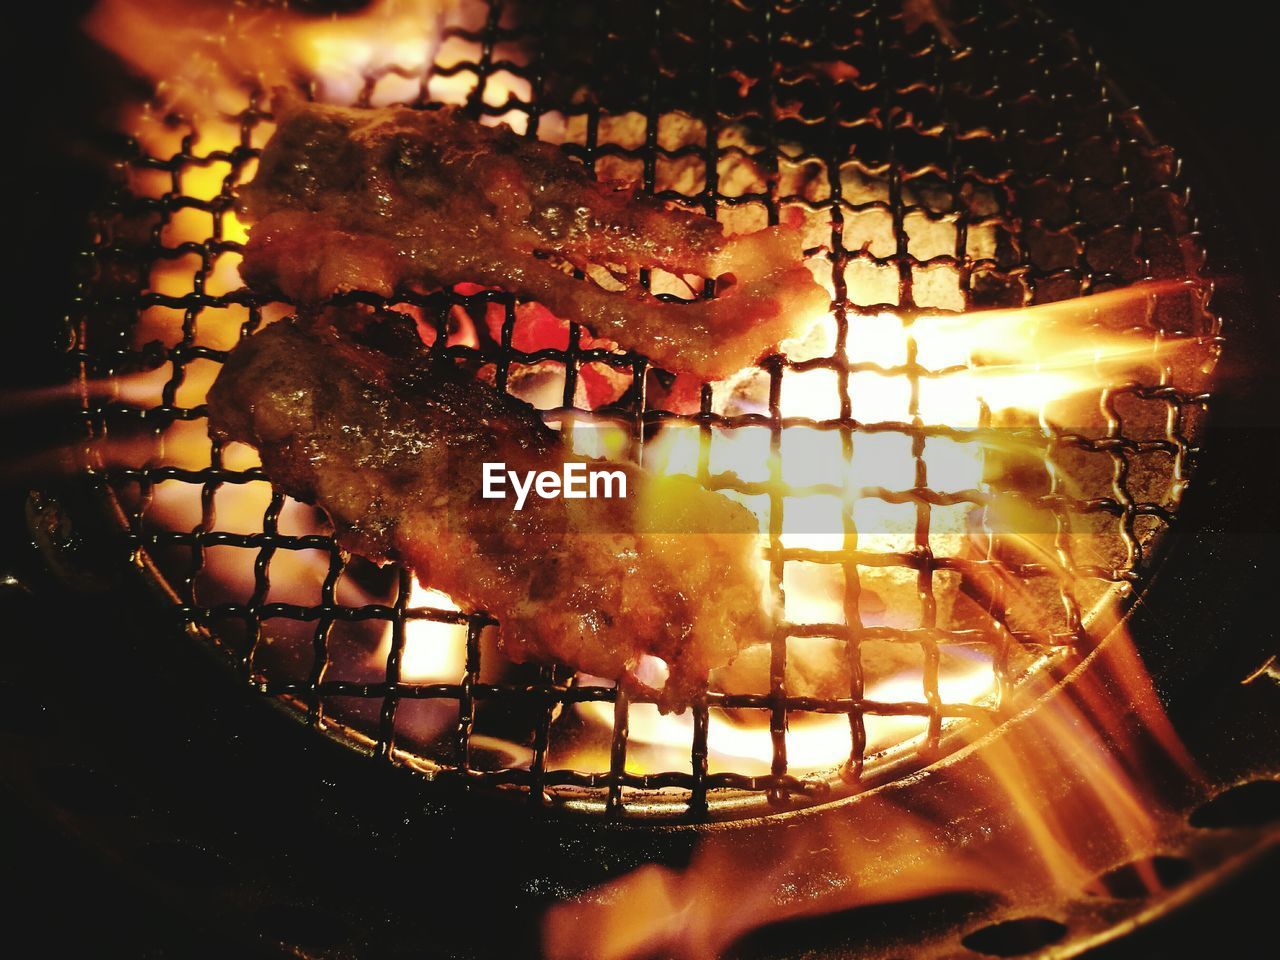 High angle view of meat cooking on barbecue grill at night